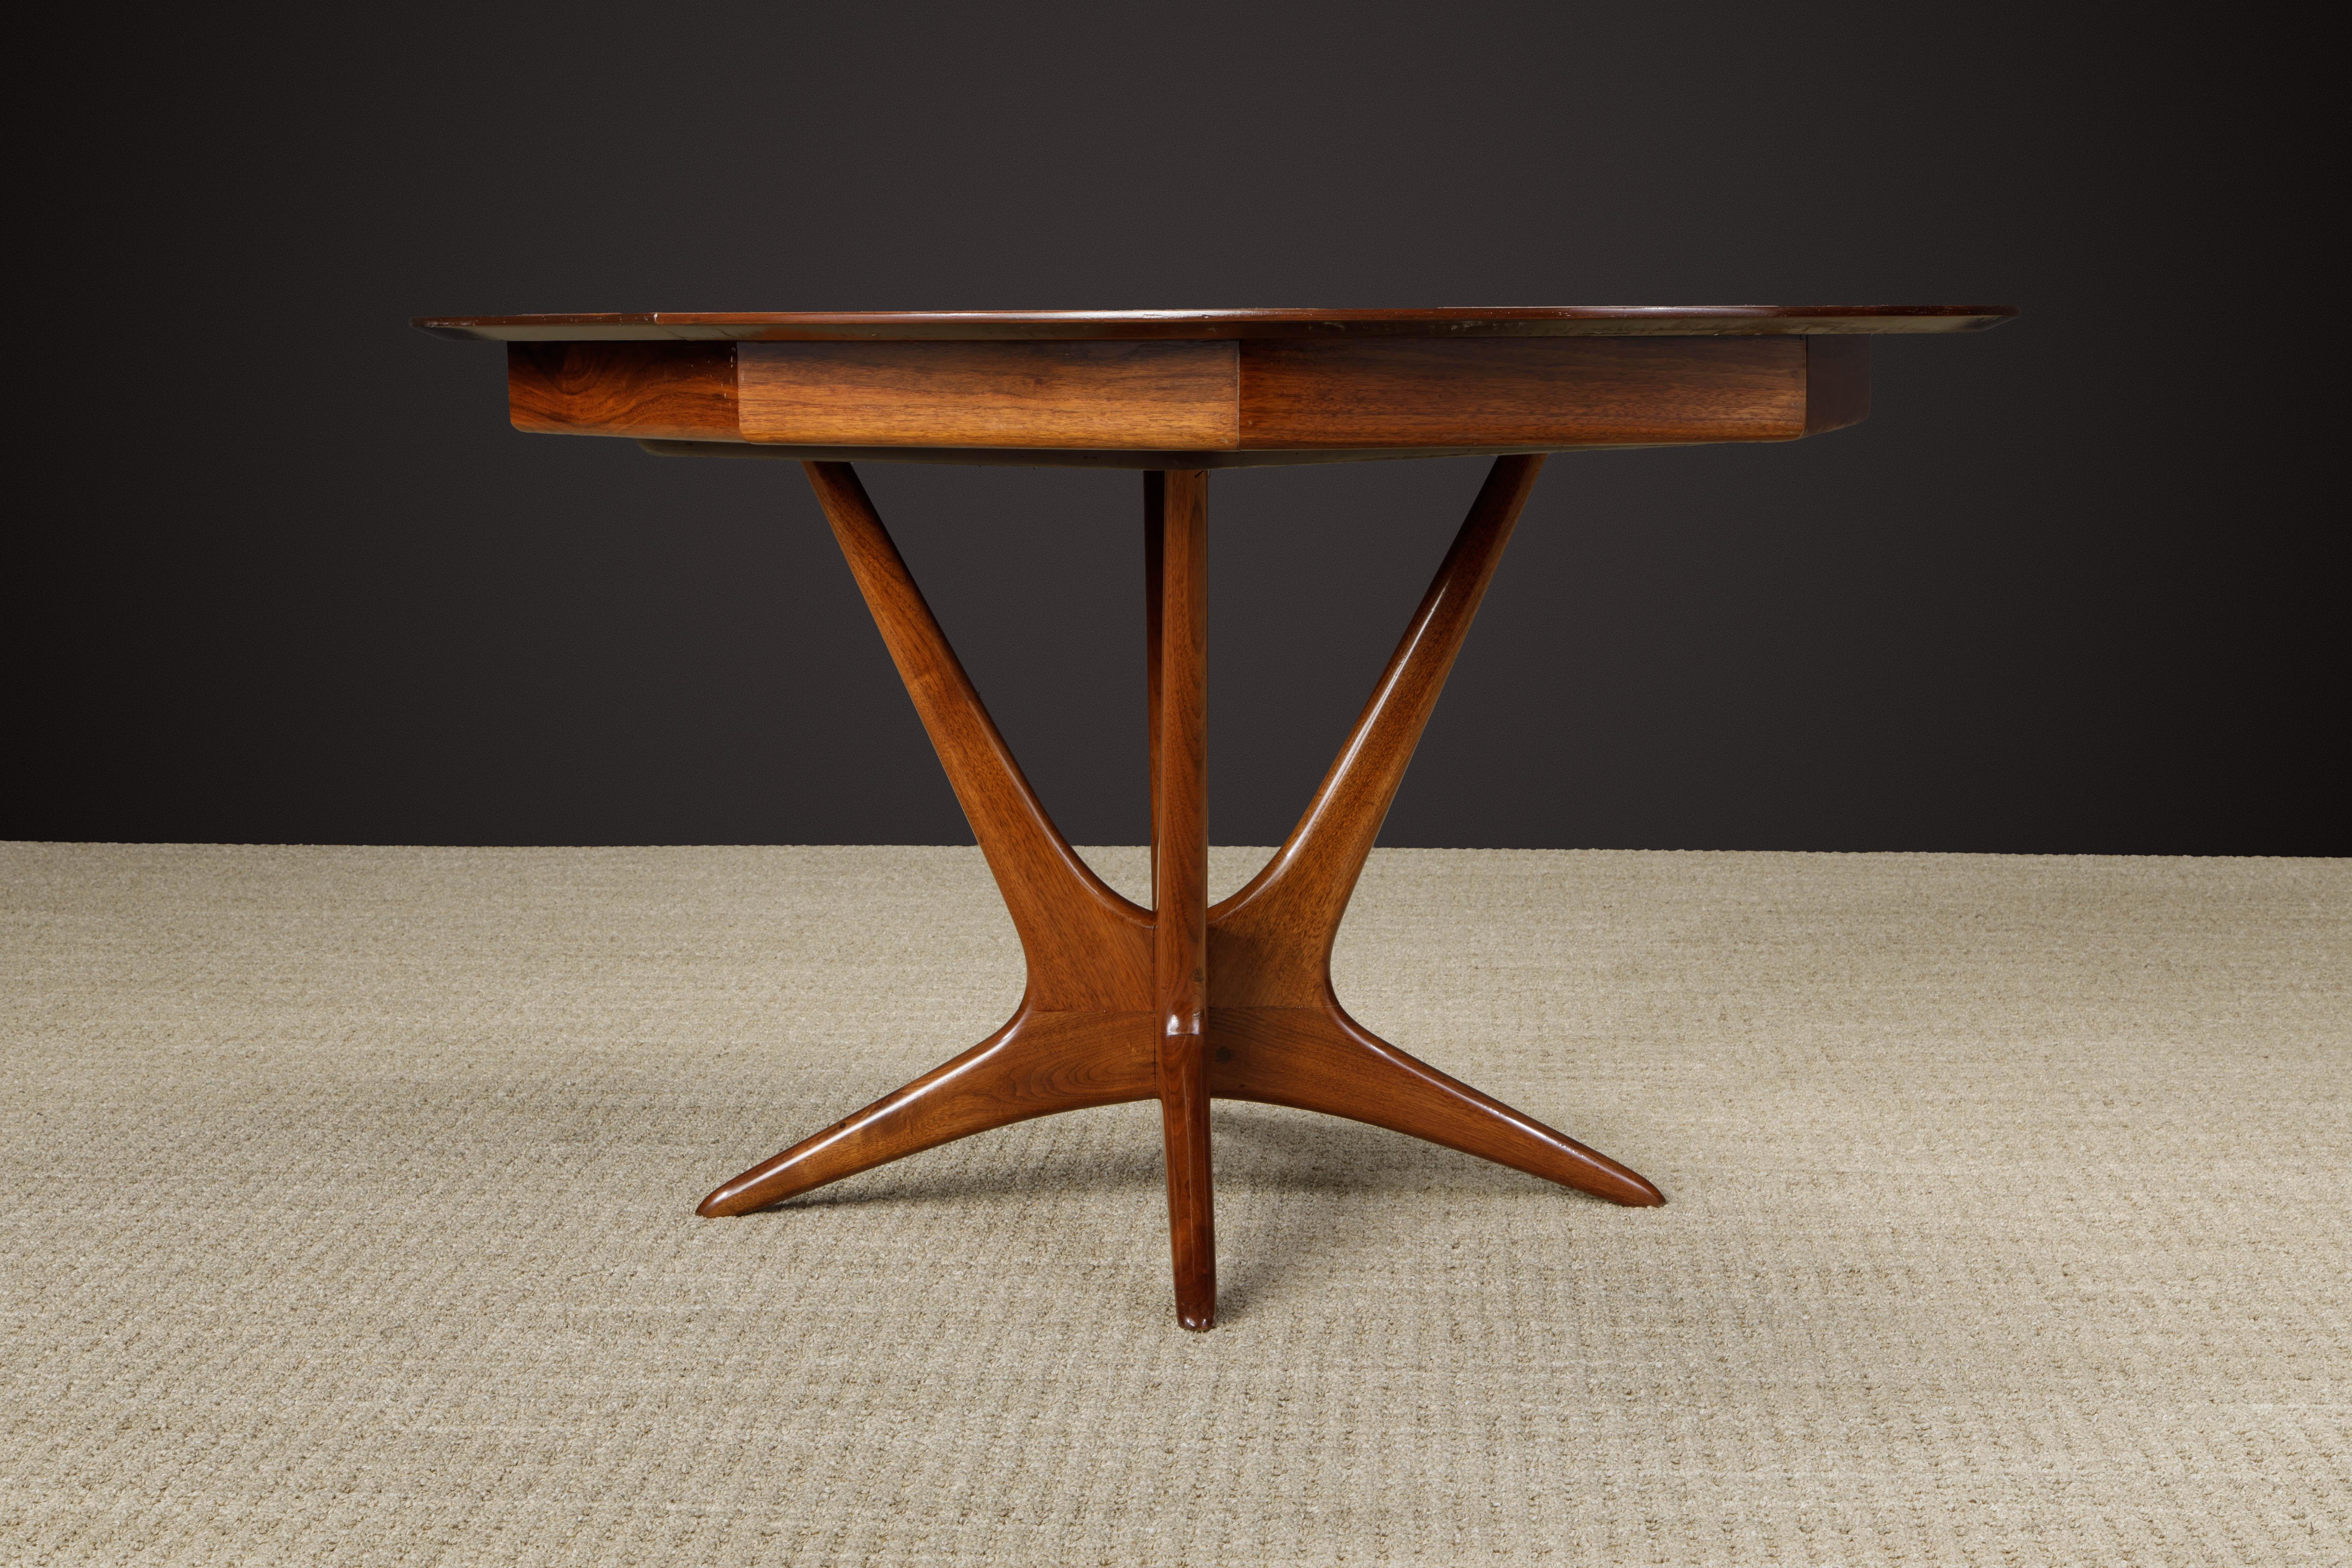 This rare and important model #VK-2060 sculptural 'Walnut Pedestal Dining Table' by Vladimir Kagan for Kagan-Dreyfuss was designed and produced in the 1950s, during Kagan's partnership with Hugo Dreyfuss which ended in 1960 making signed items